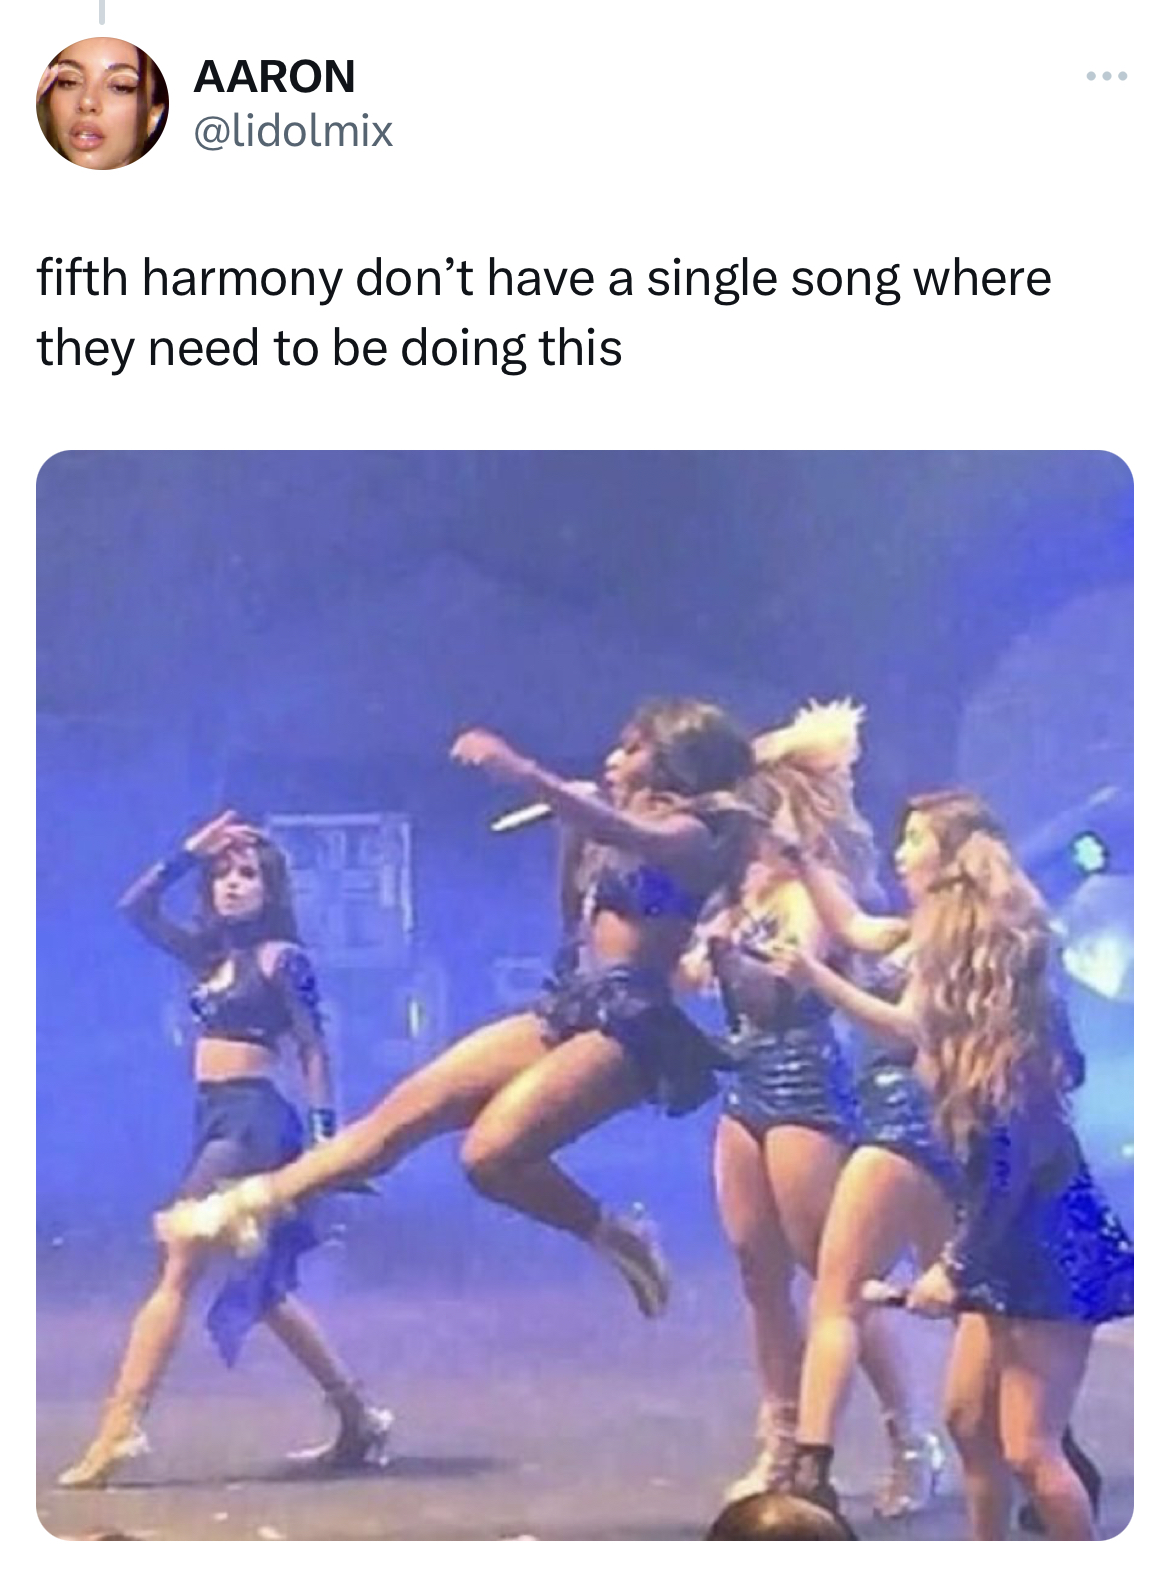 Don't have a single song where they need to do this - dancer - Aaron fifth harmony don't have a single song where they need to be doing this